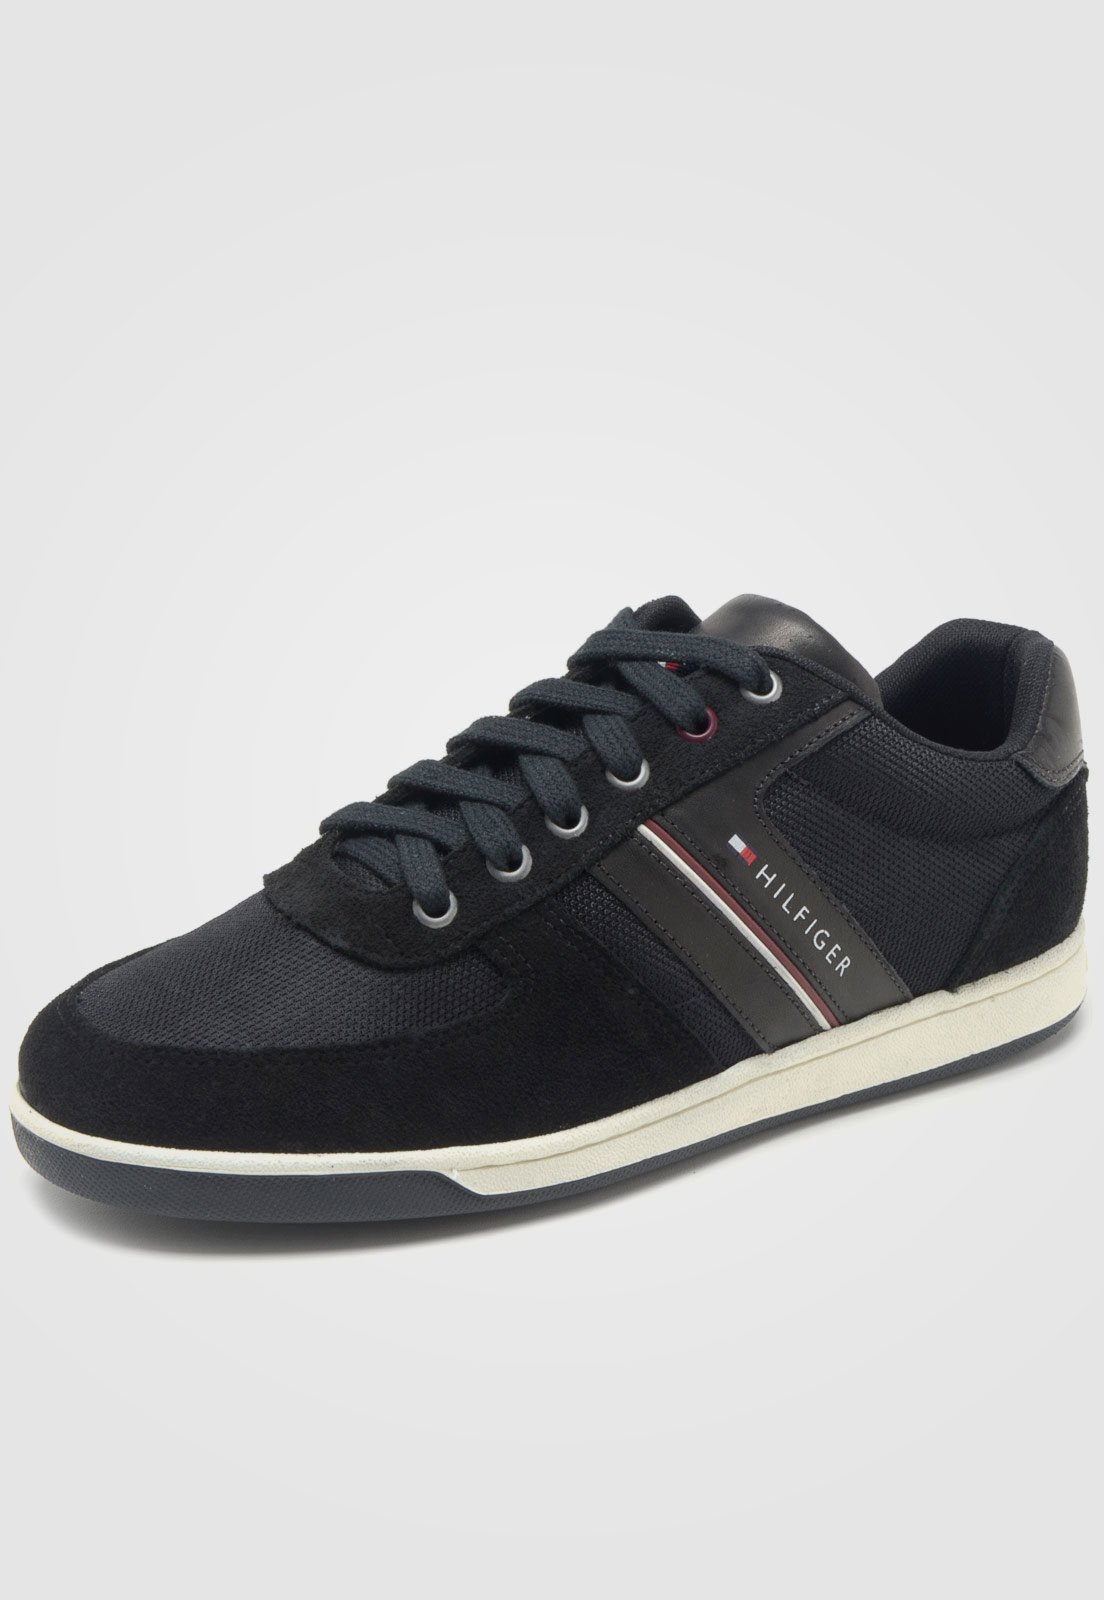 tenis casual tommy hilfiger